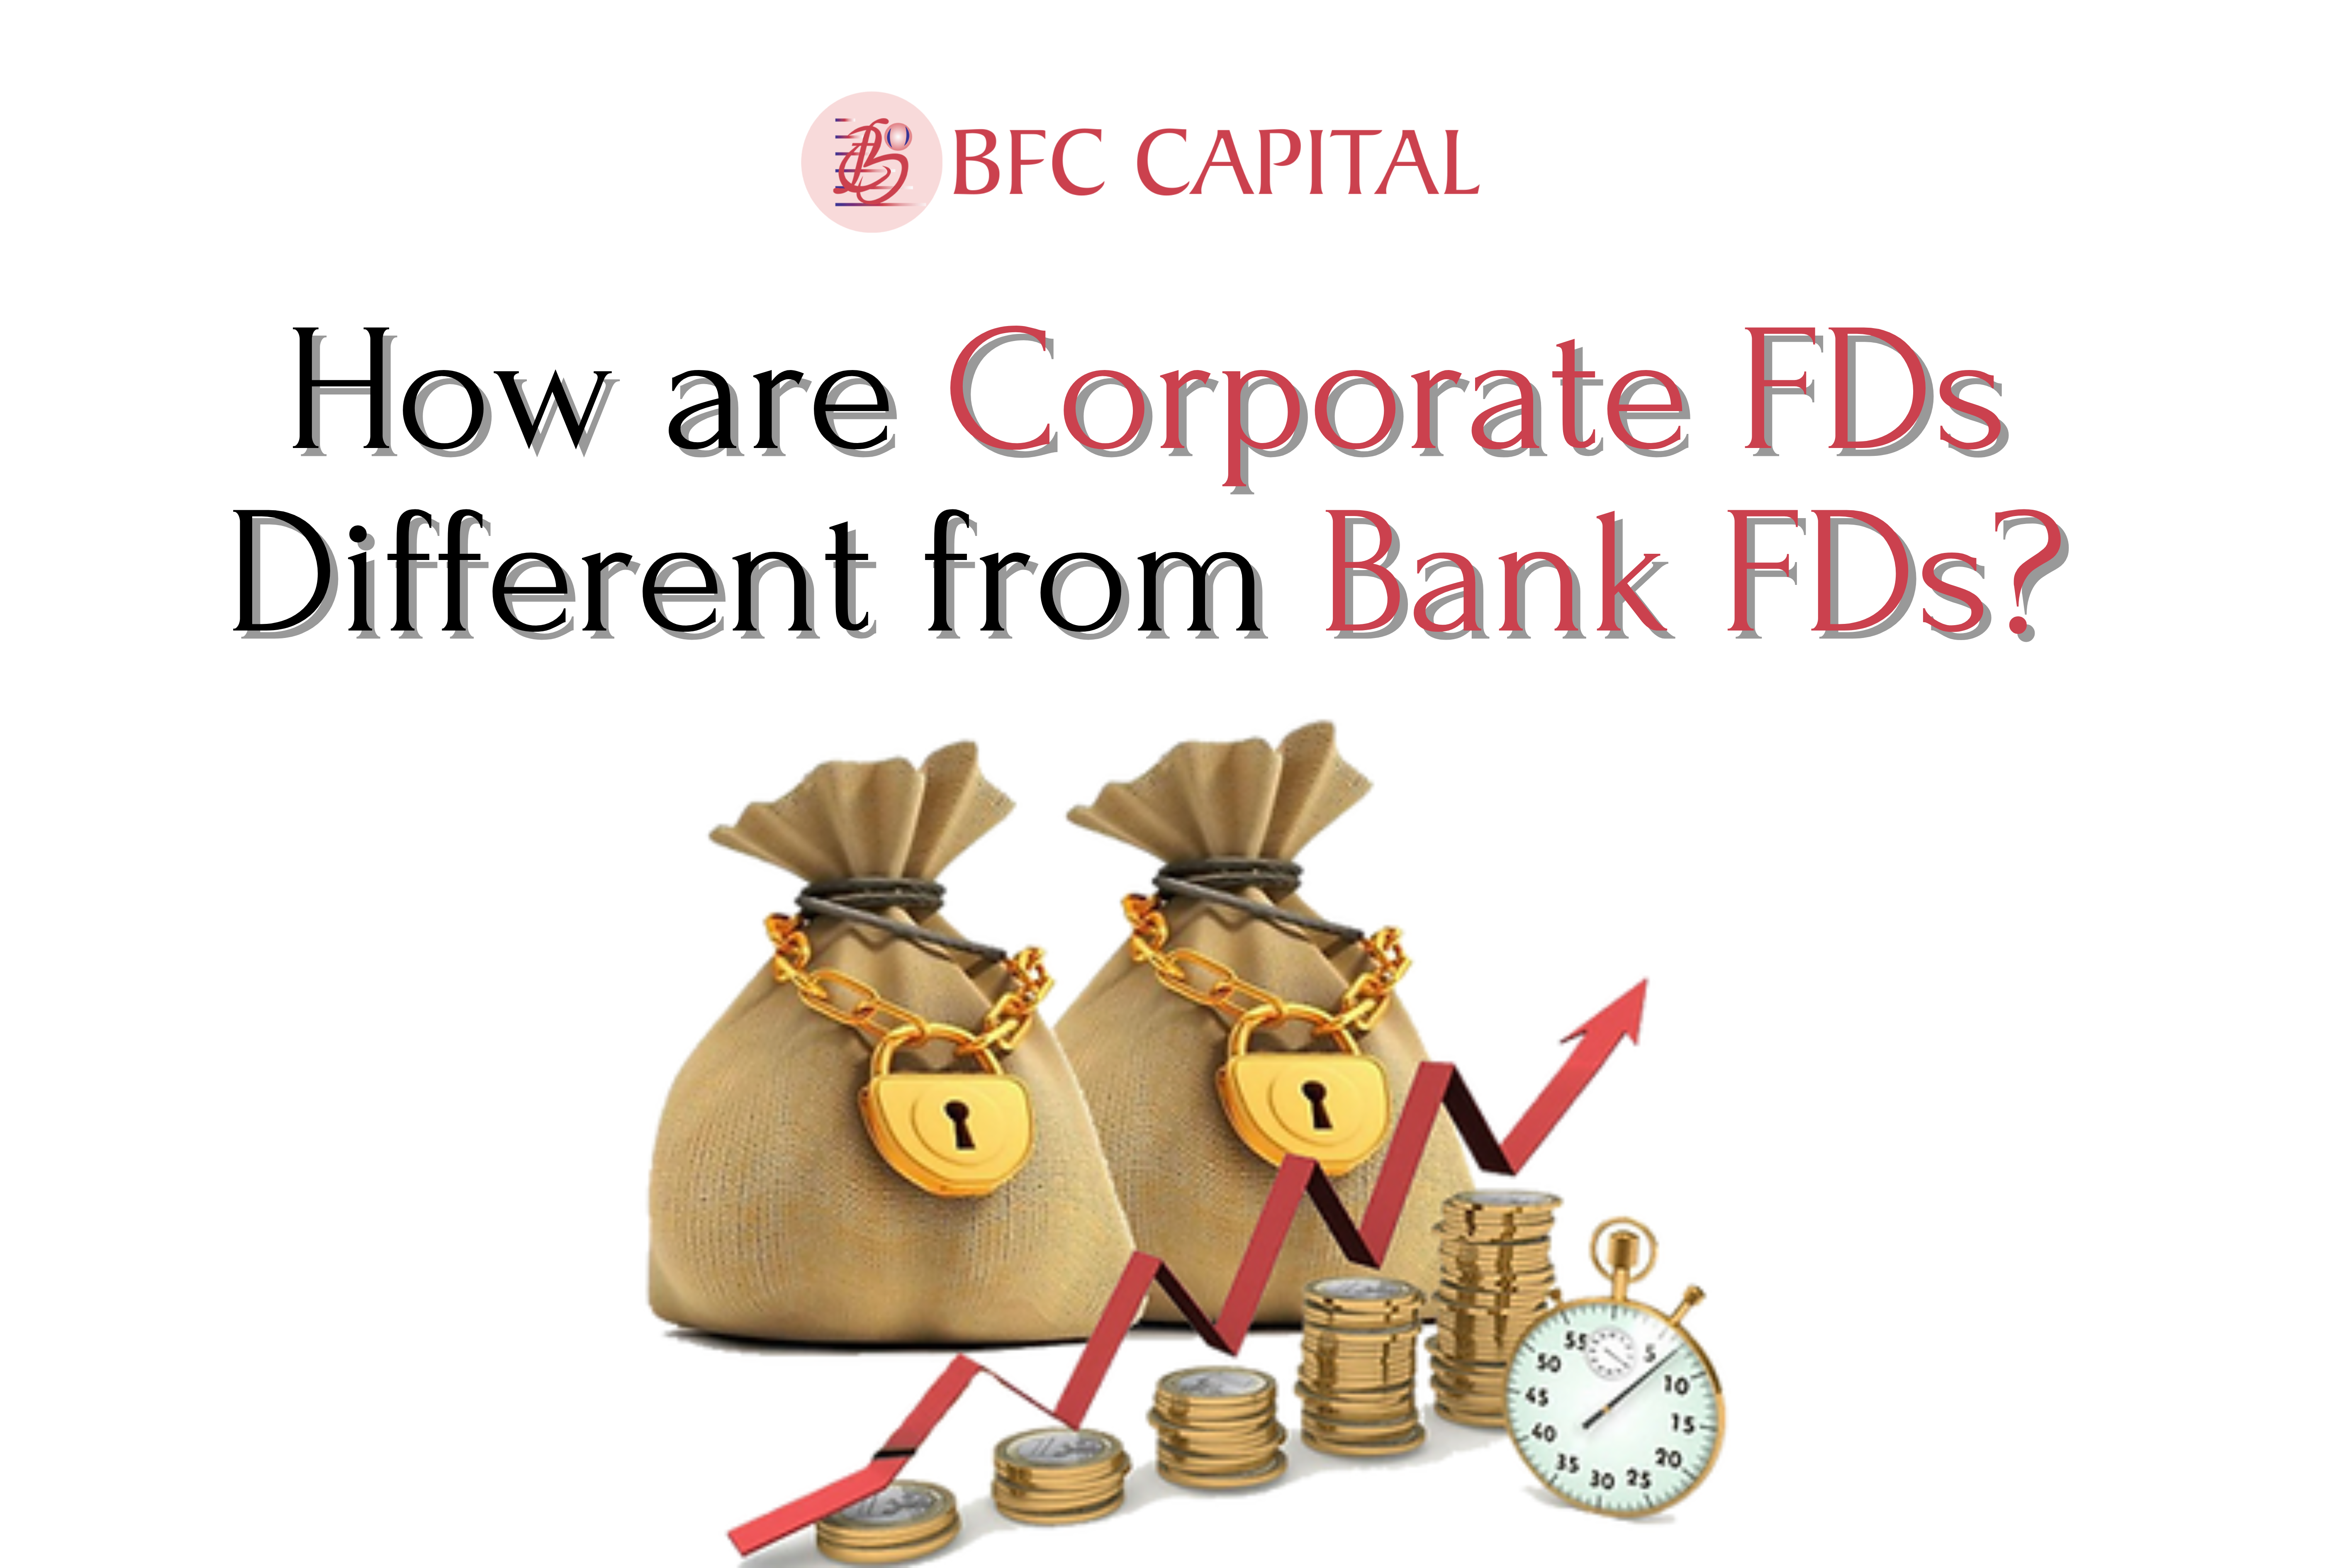 How are Corporate FDs Different from Bank FDs?